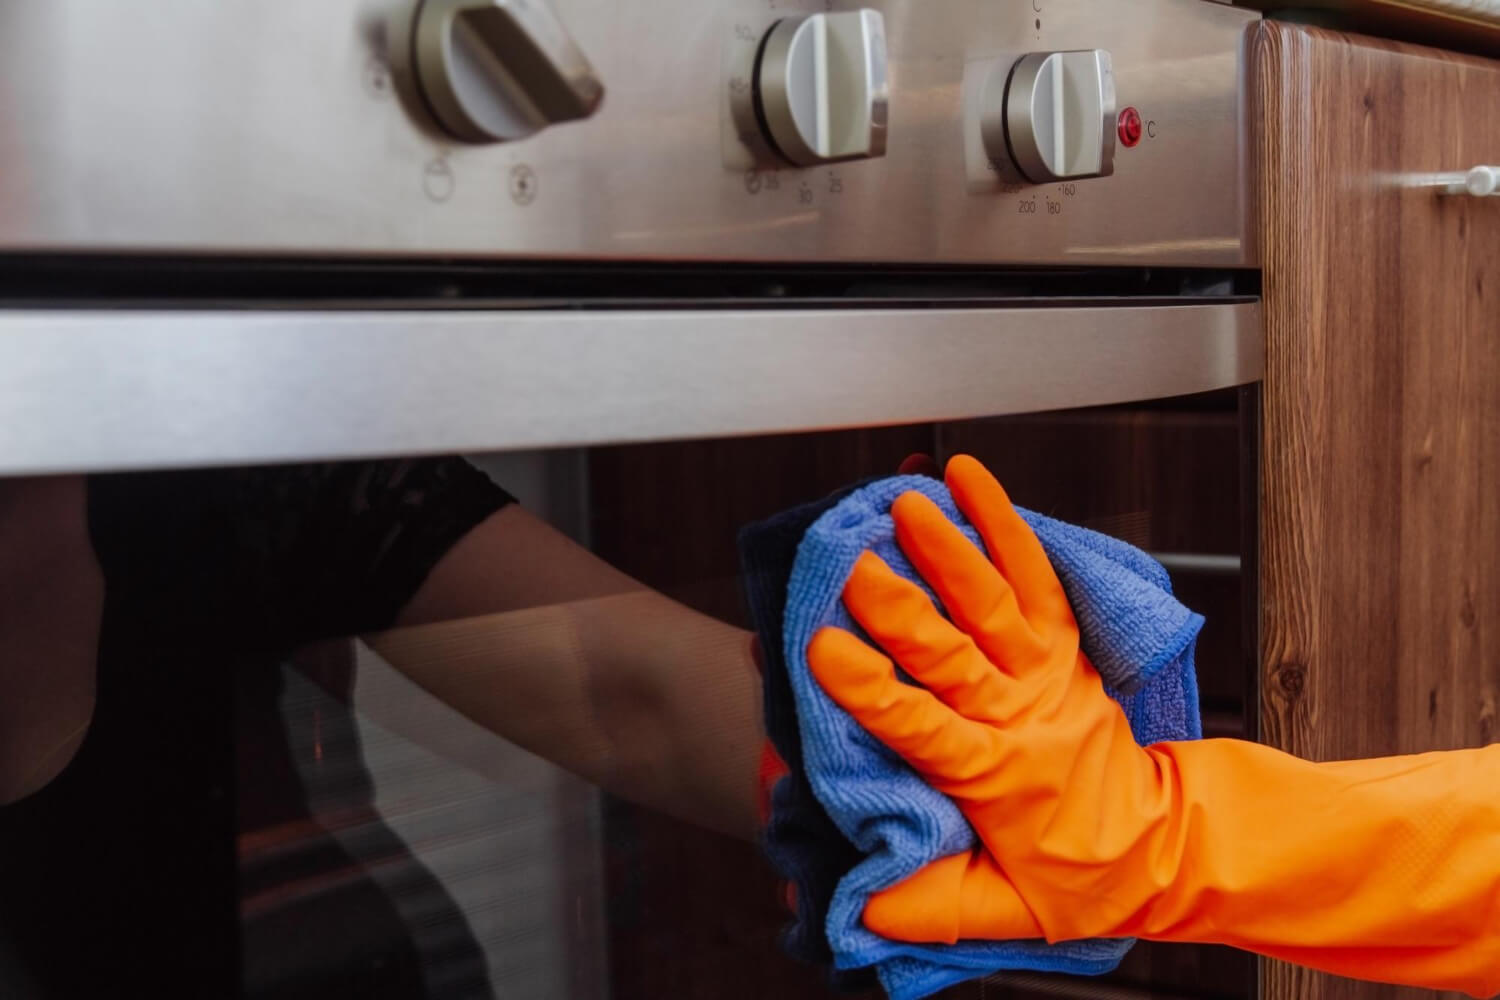 orangegloved hand with microfiber cleaning cloth wipes the outside of an electric oven